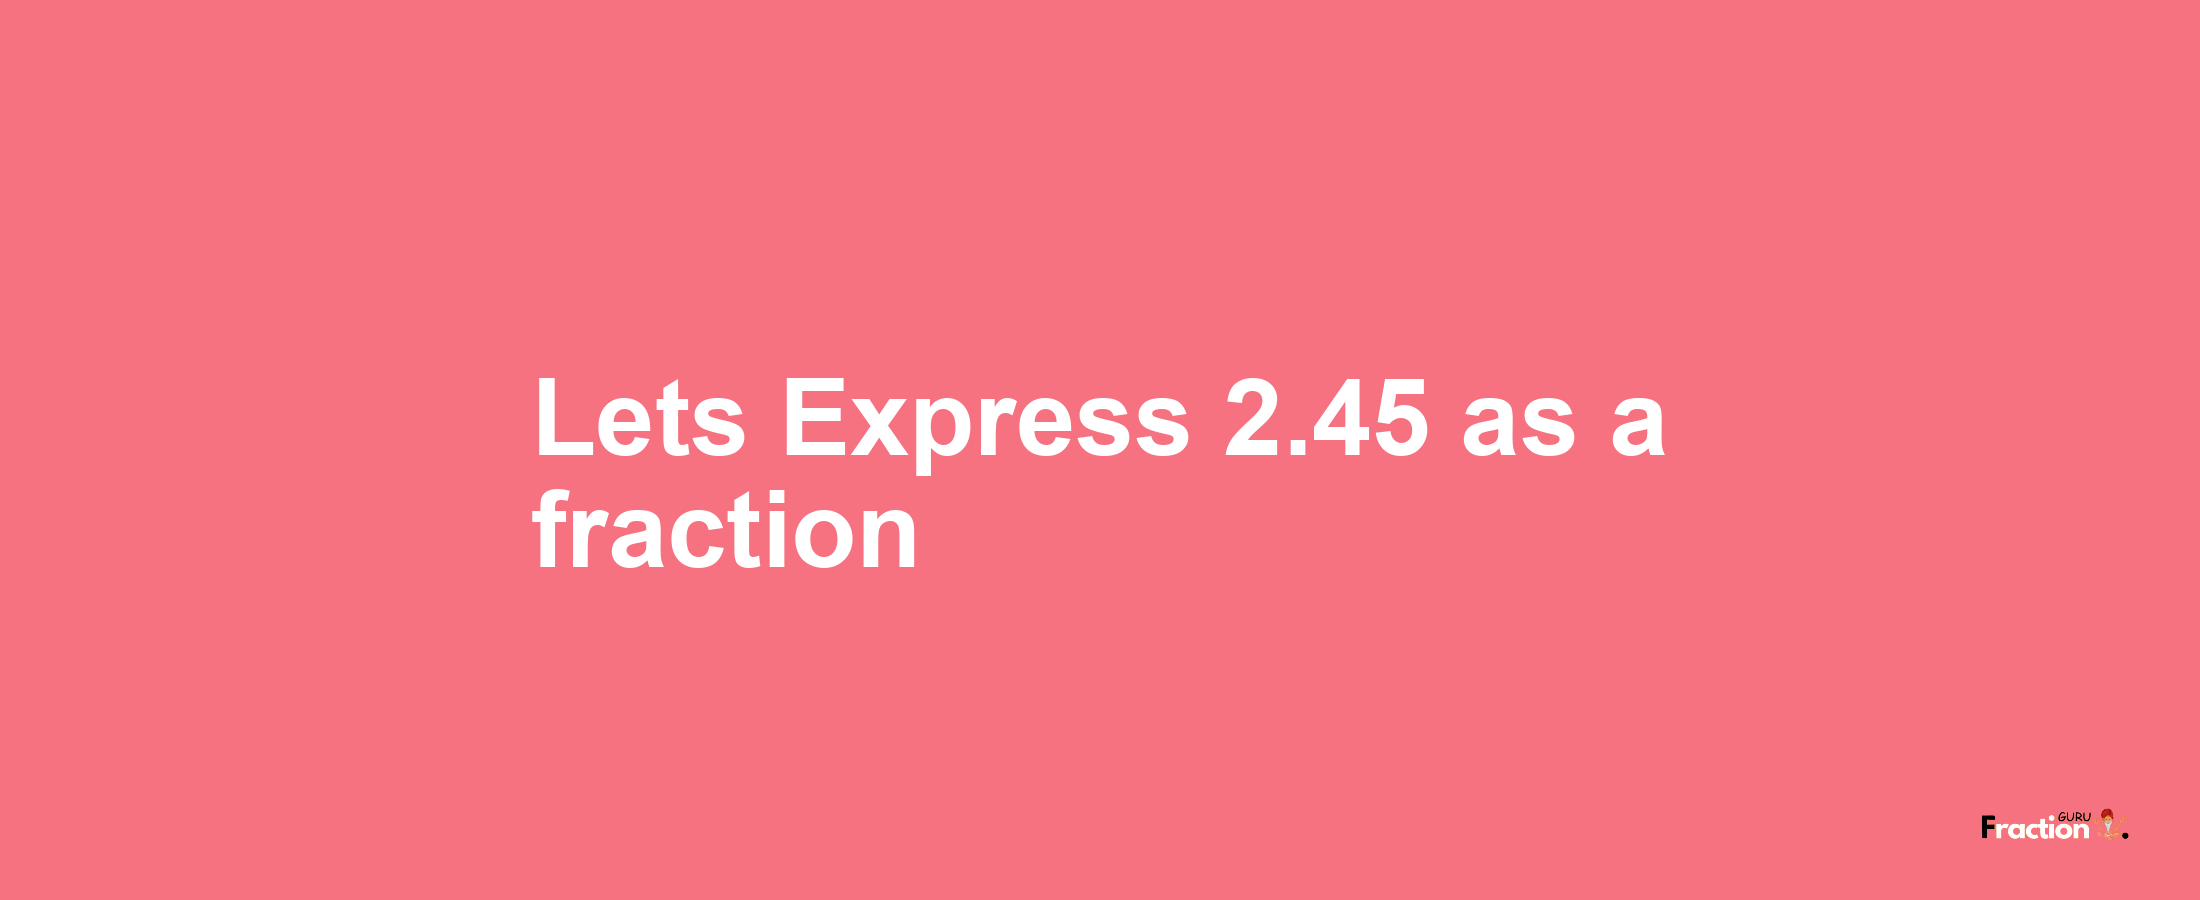 Lets Express 2.45 as afraction